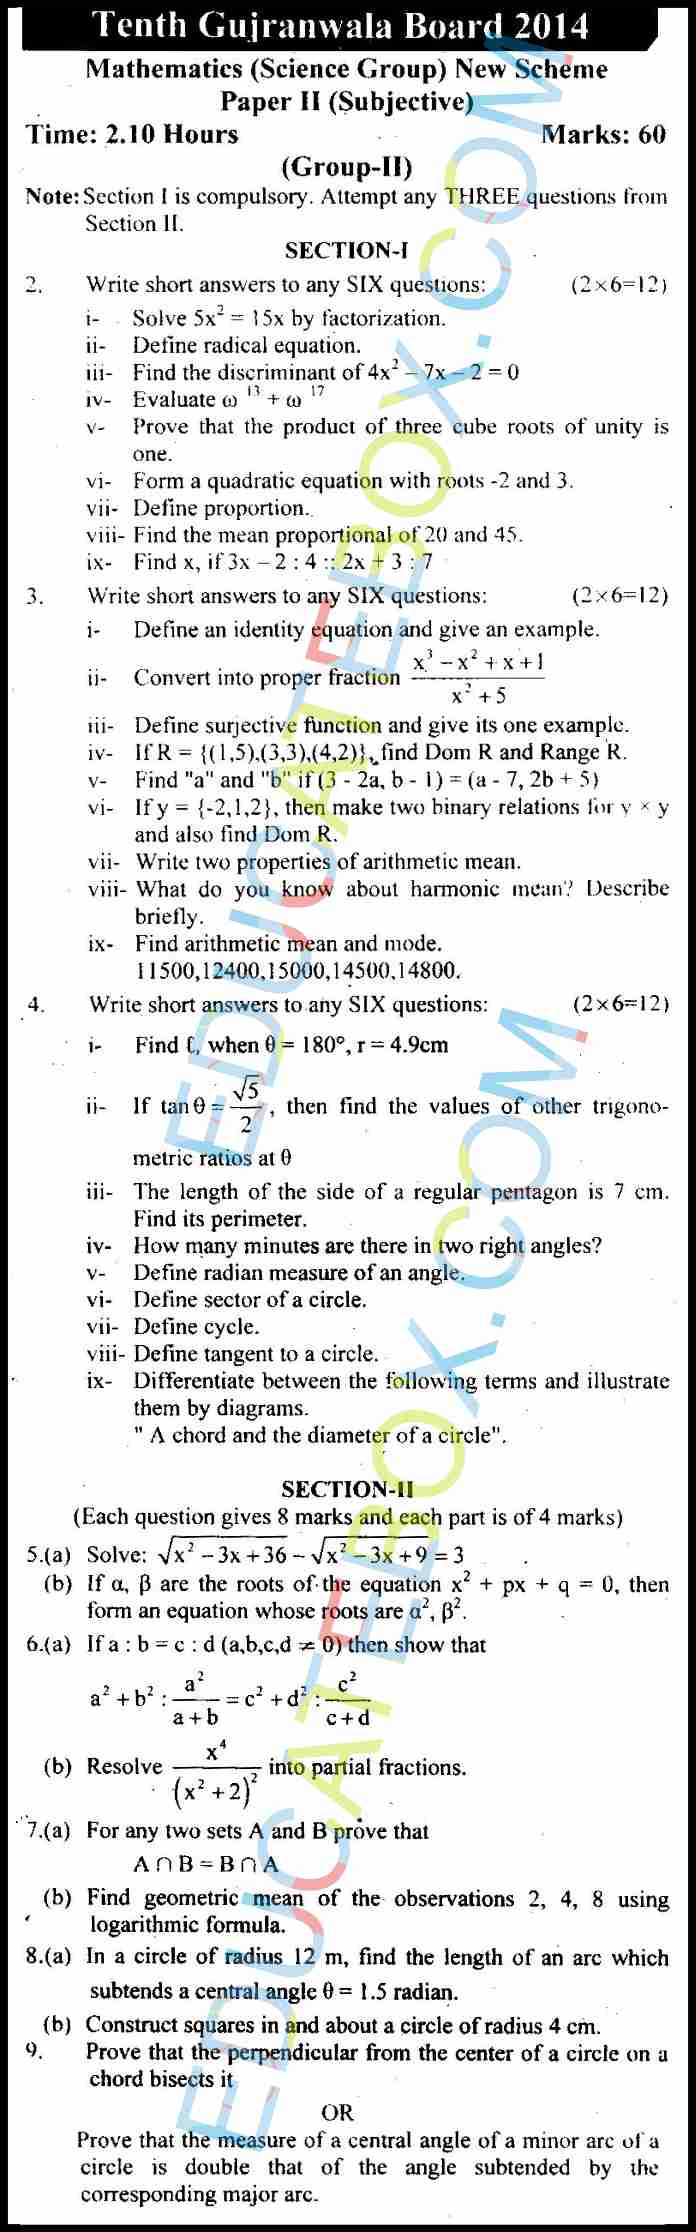 Past Paper Class 10 Maths (Science Group) Gujranwala Board 2014 Subjective Type Group 2 (English Medium)